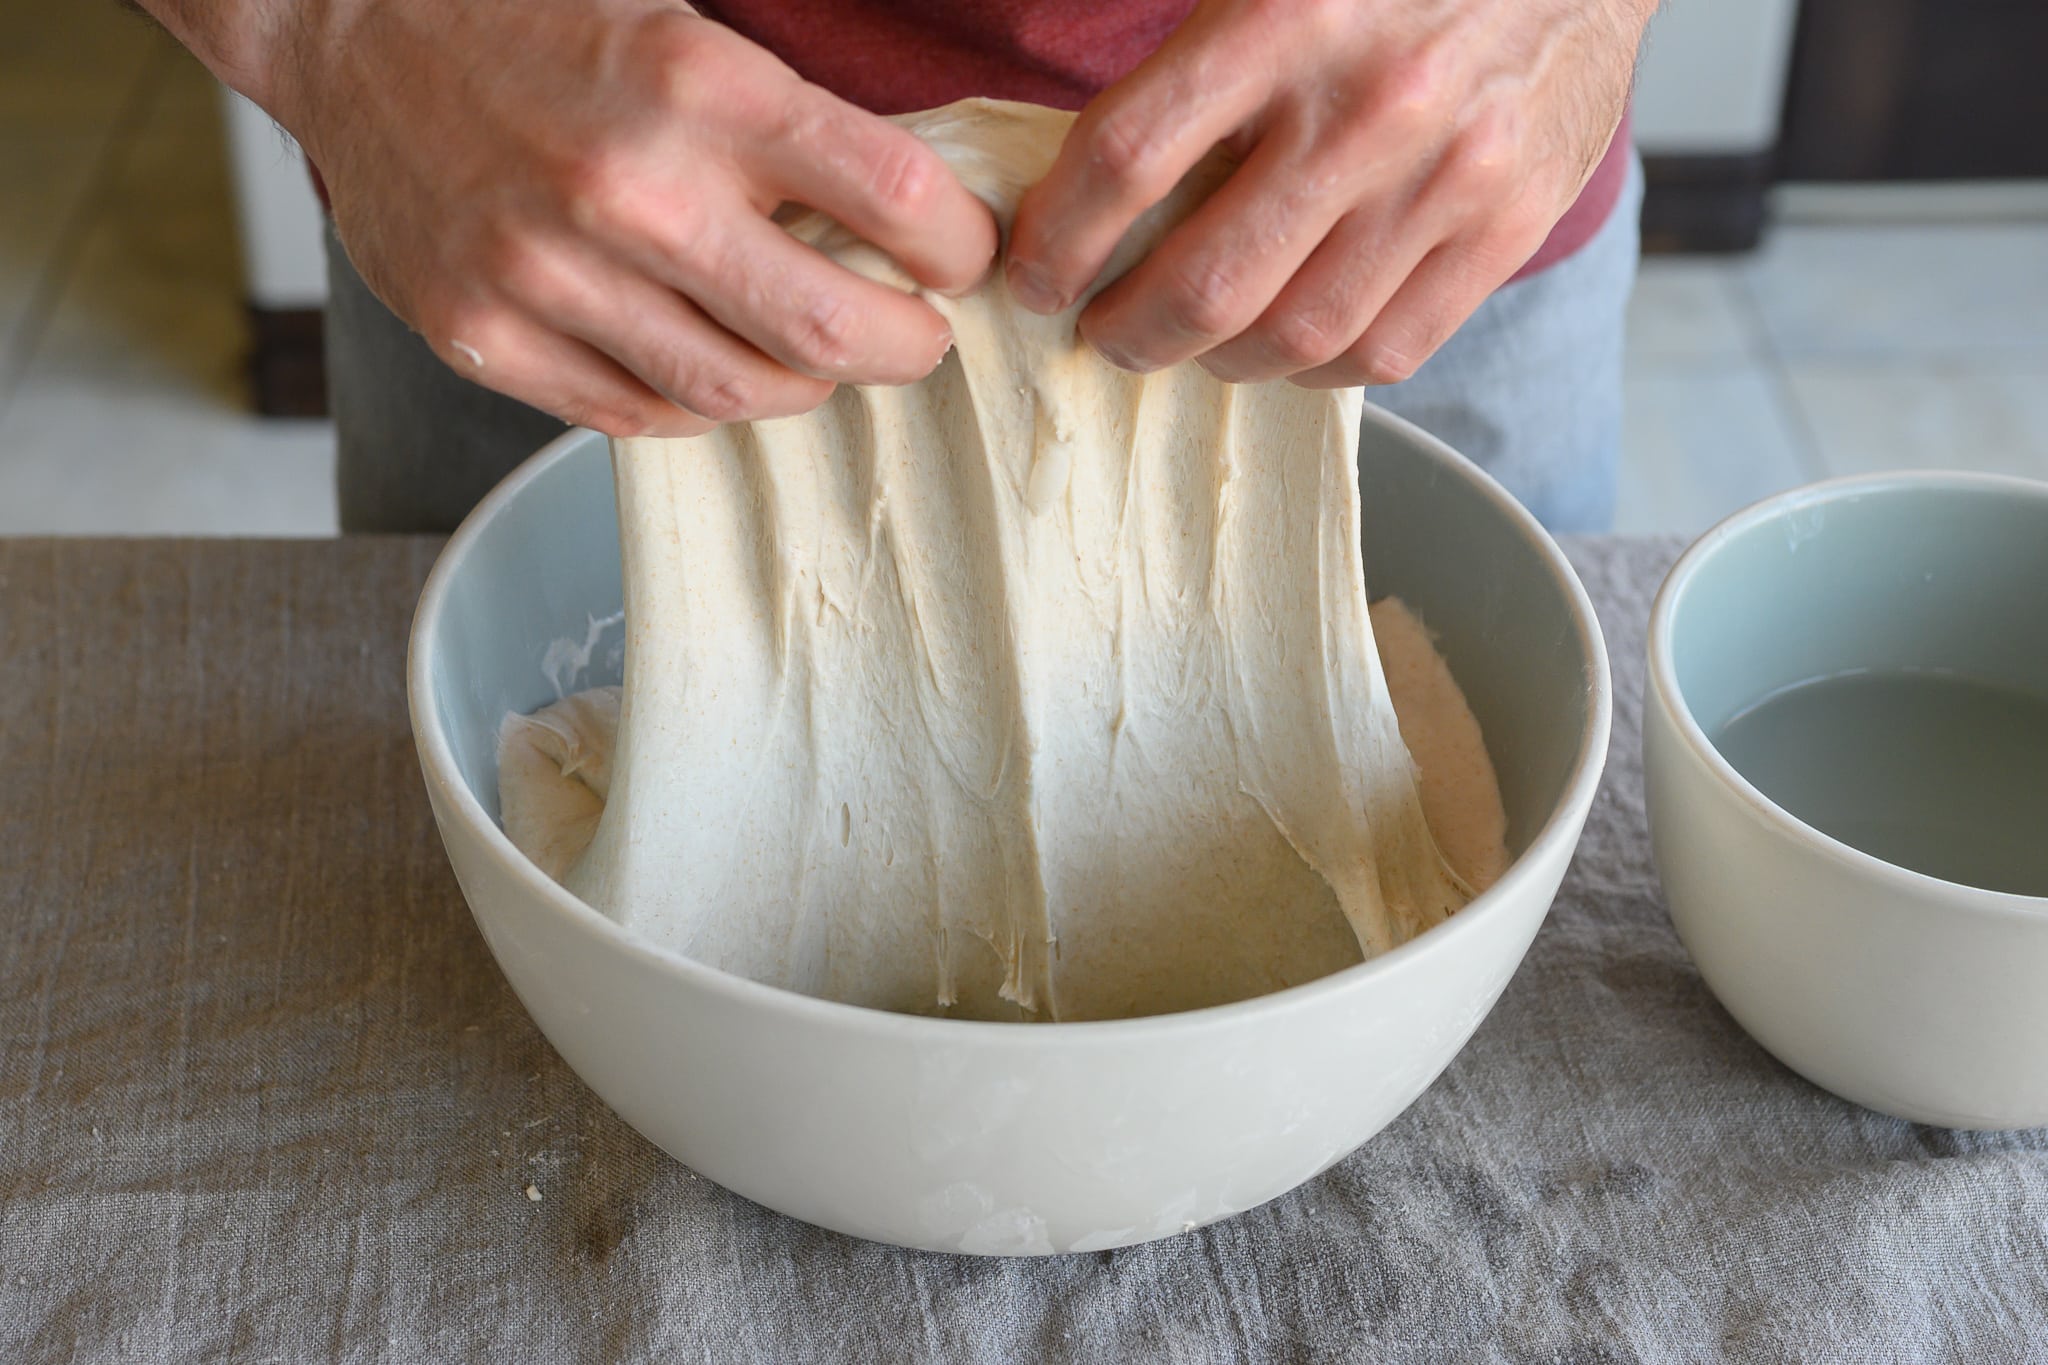 https://www.theperfectloaf.com/wp-content/uploads/2020/12/theperfectloaf-how-to-stretch-and-fold-sourdough-7.jpg